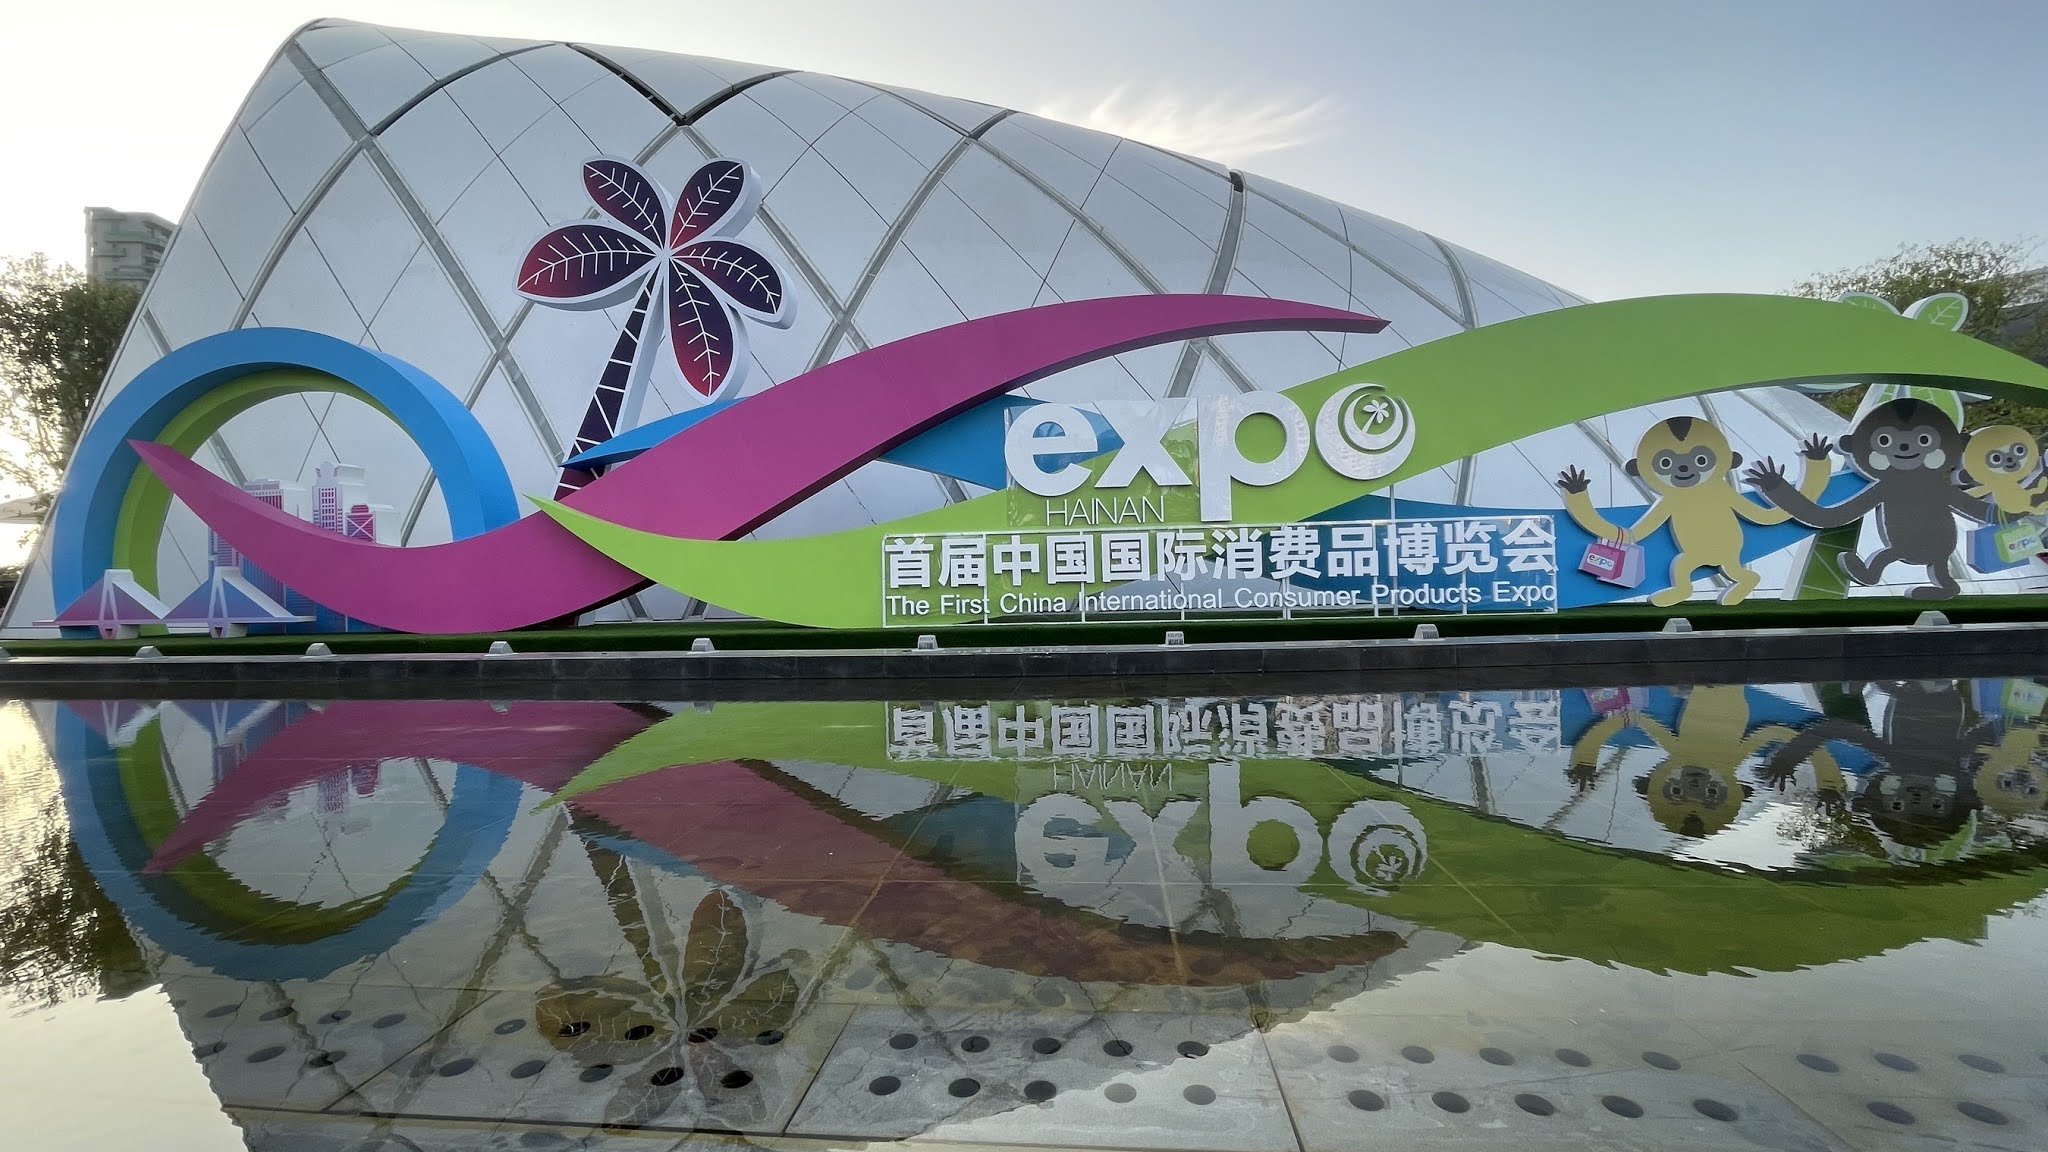 China's first Int'l Consumer Products Expo attracts over 2500 brands from 70 countries